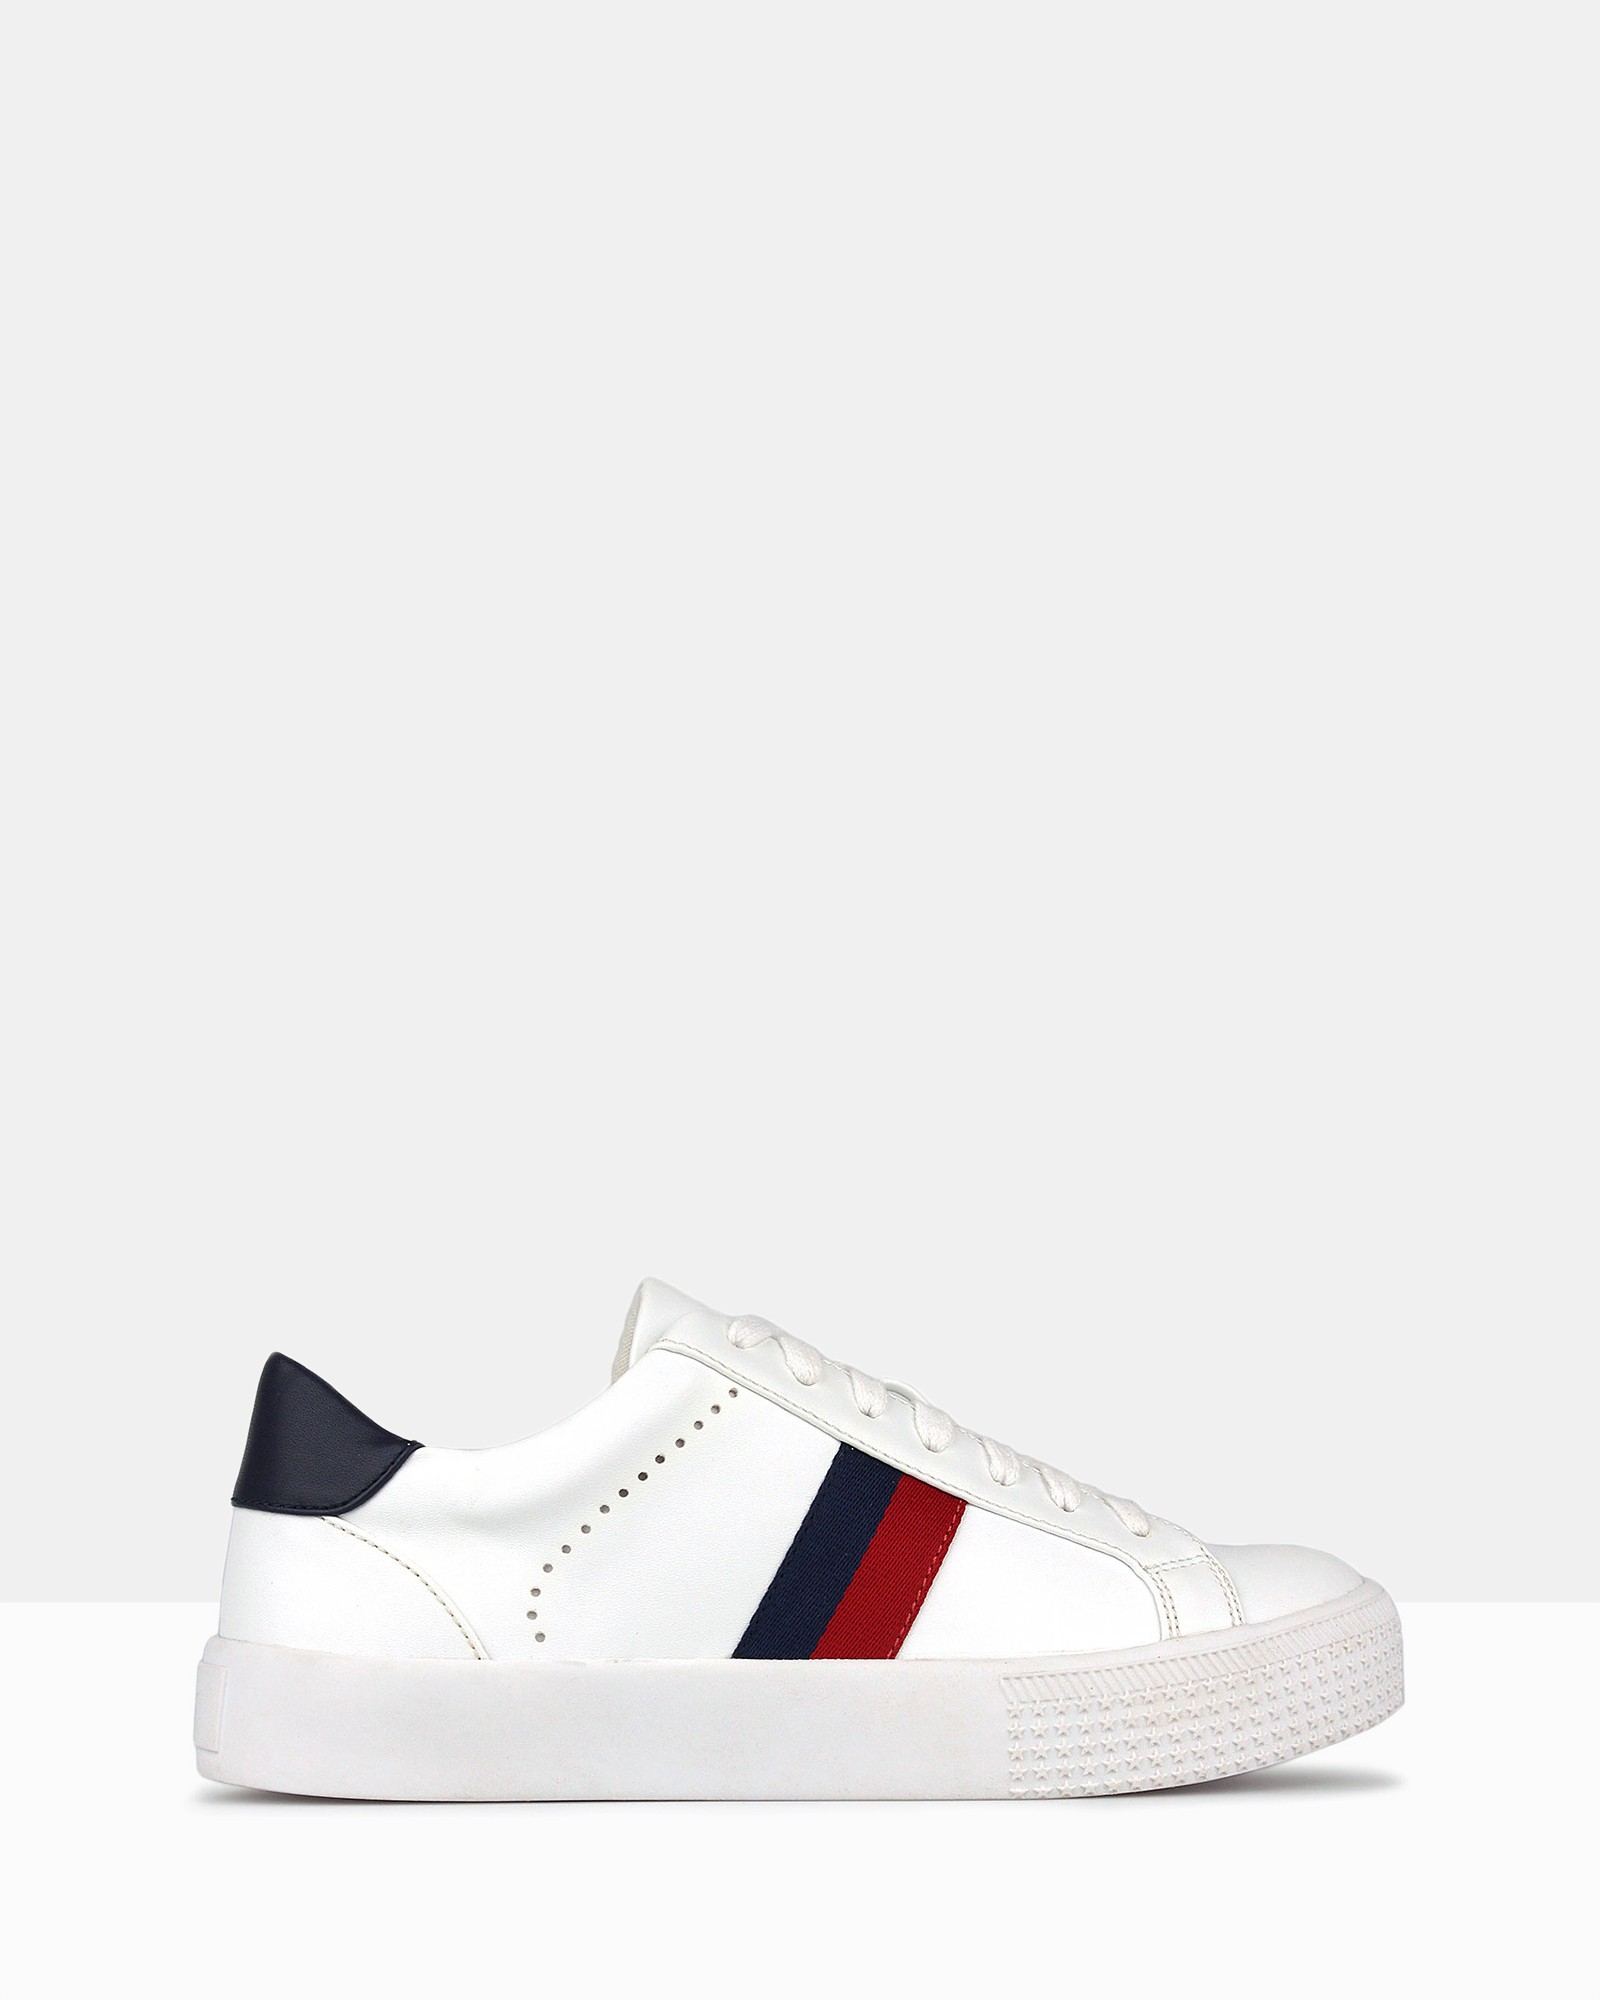 Patriot Striped Sneakers White by Betts | ShoeSales